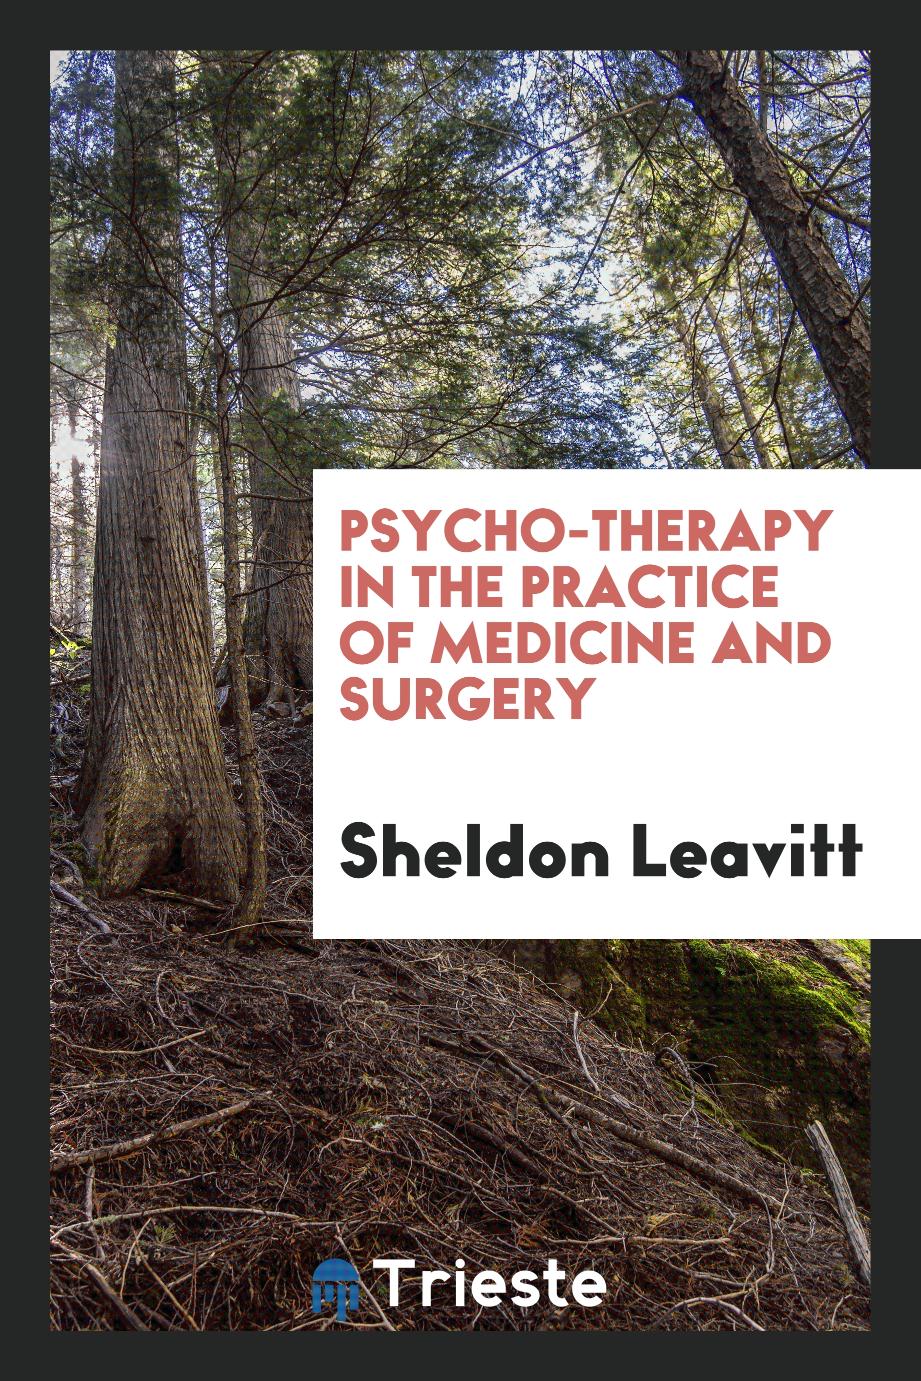 Psycho-therapy in the practice of medicine and surgery